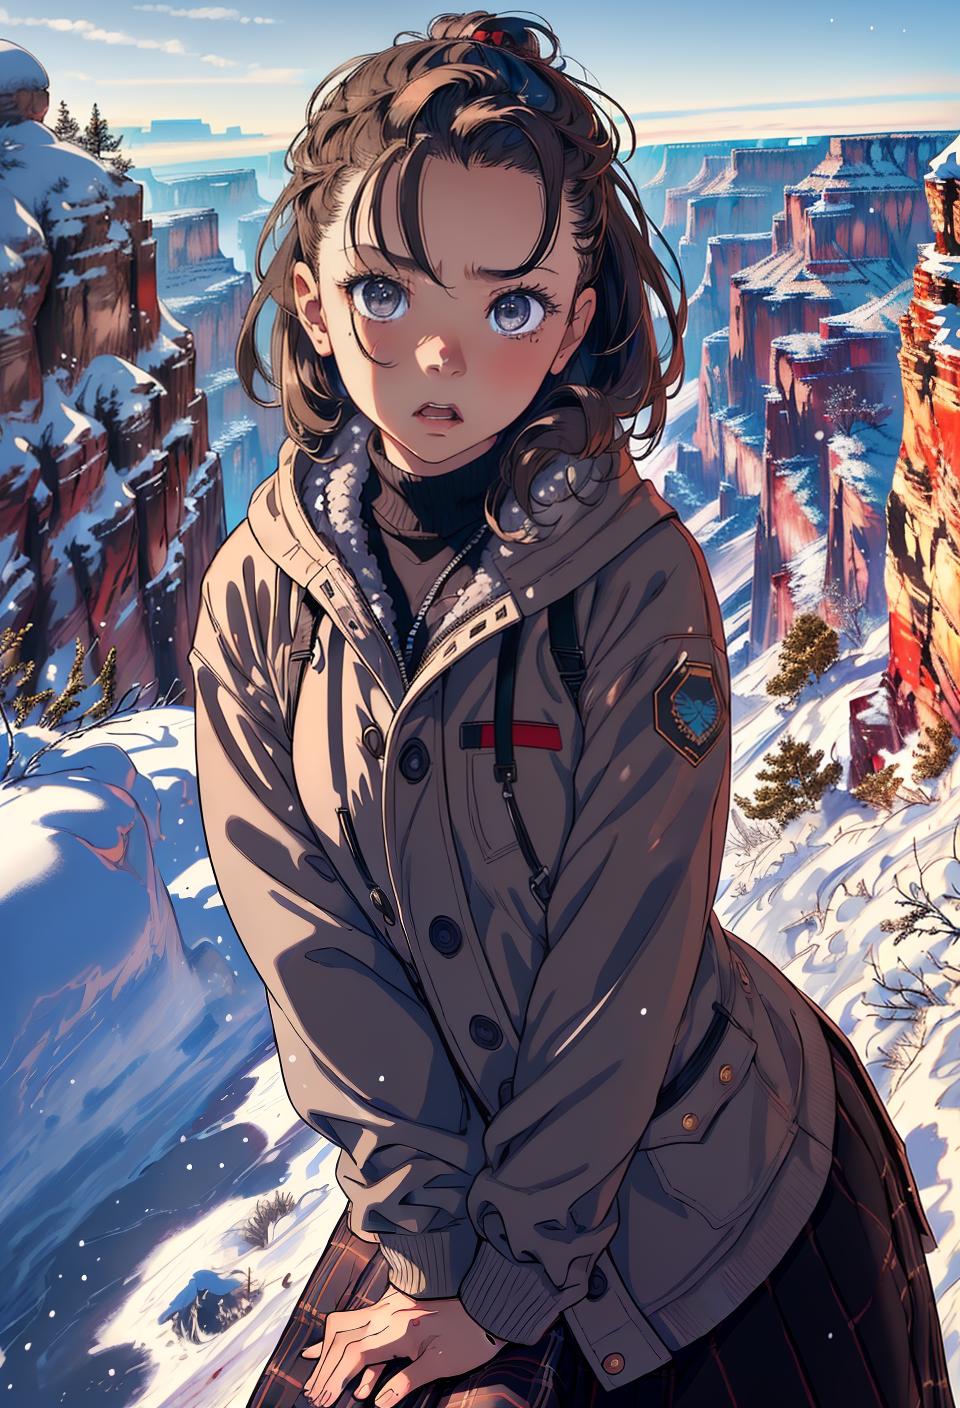  ((trending, highres, masterpiece, cinematic shot)), 1girl, young, female winter clothes, Grand Canyon scene, medium-length spiked light brown hair, hair slicked back,  grey eyes, calm personality, scared expression, dark skin, orderly, limber